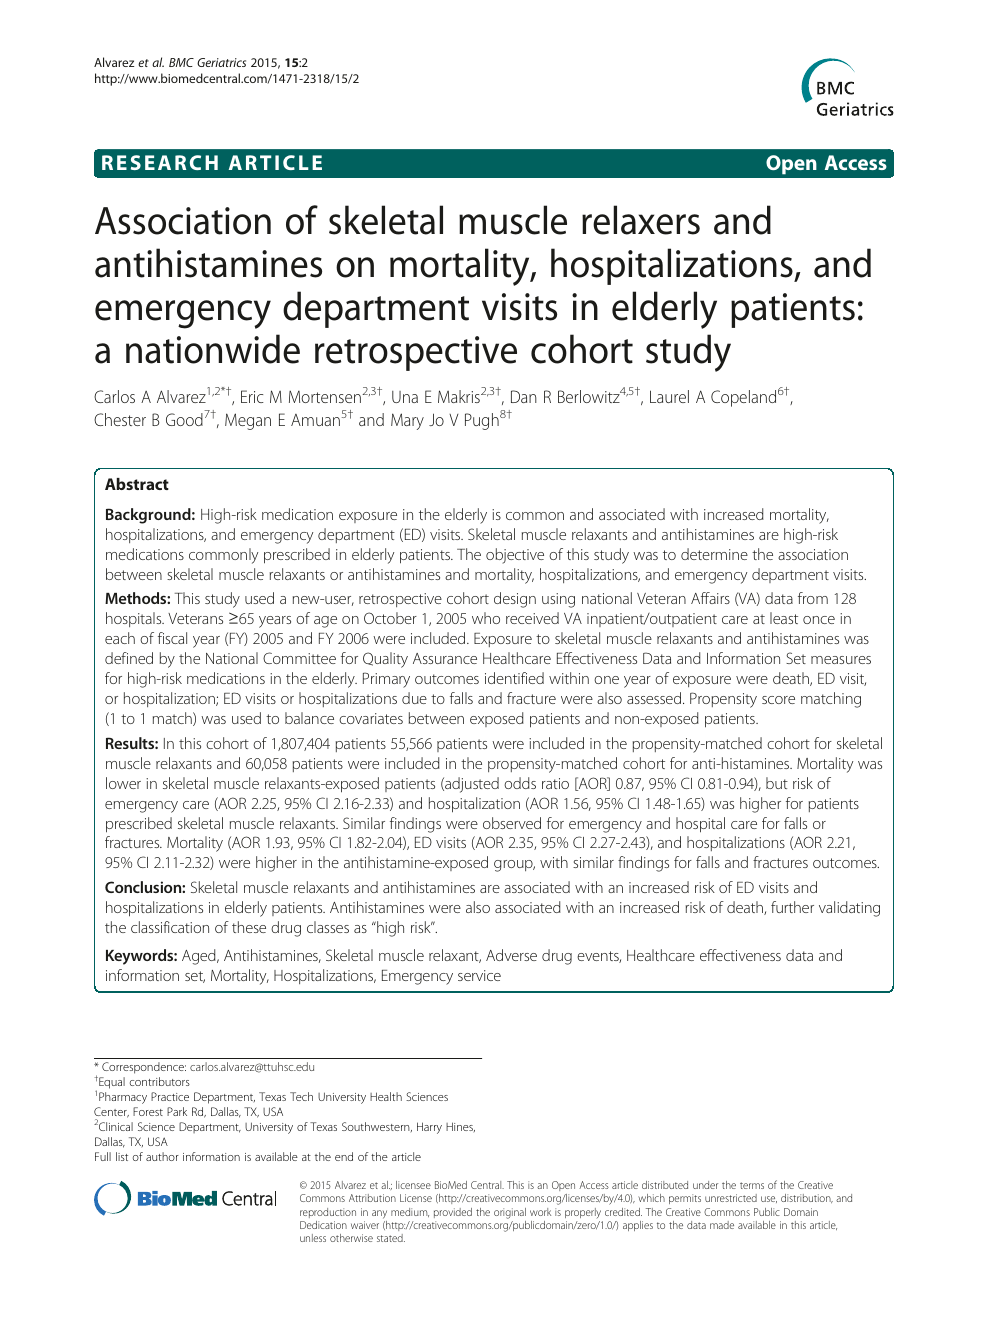 Association Of Skeletal Muscle Relaxers And Antihistamines